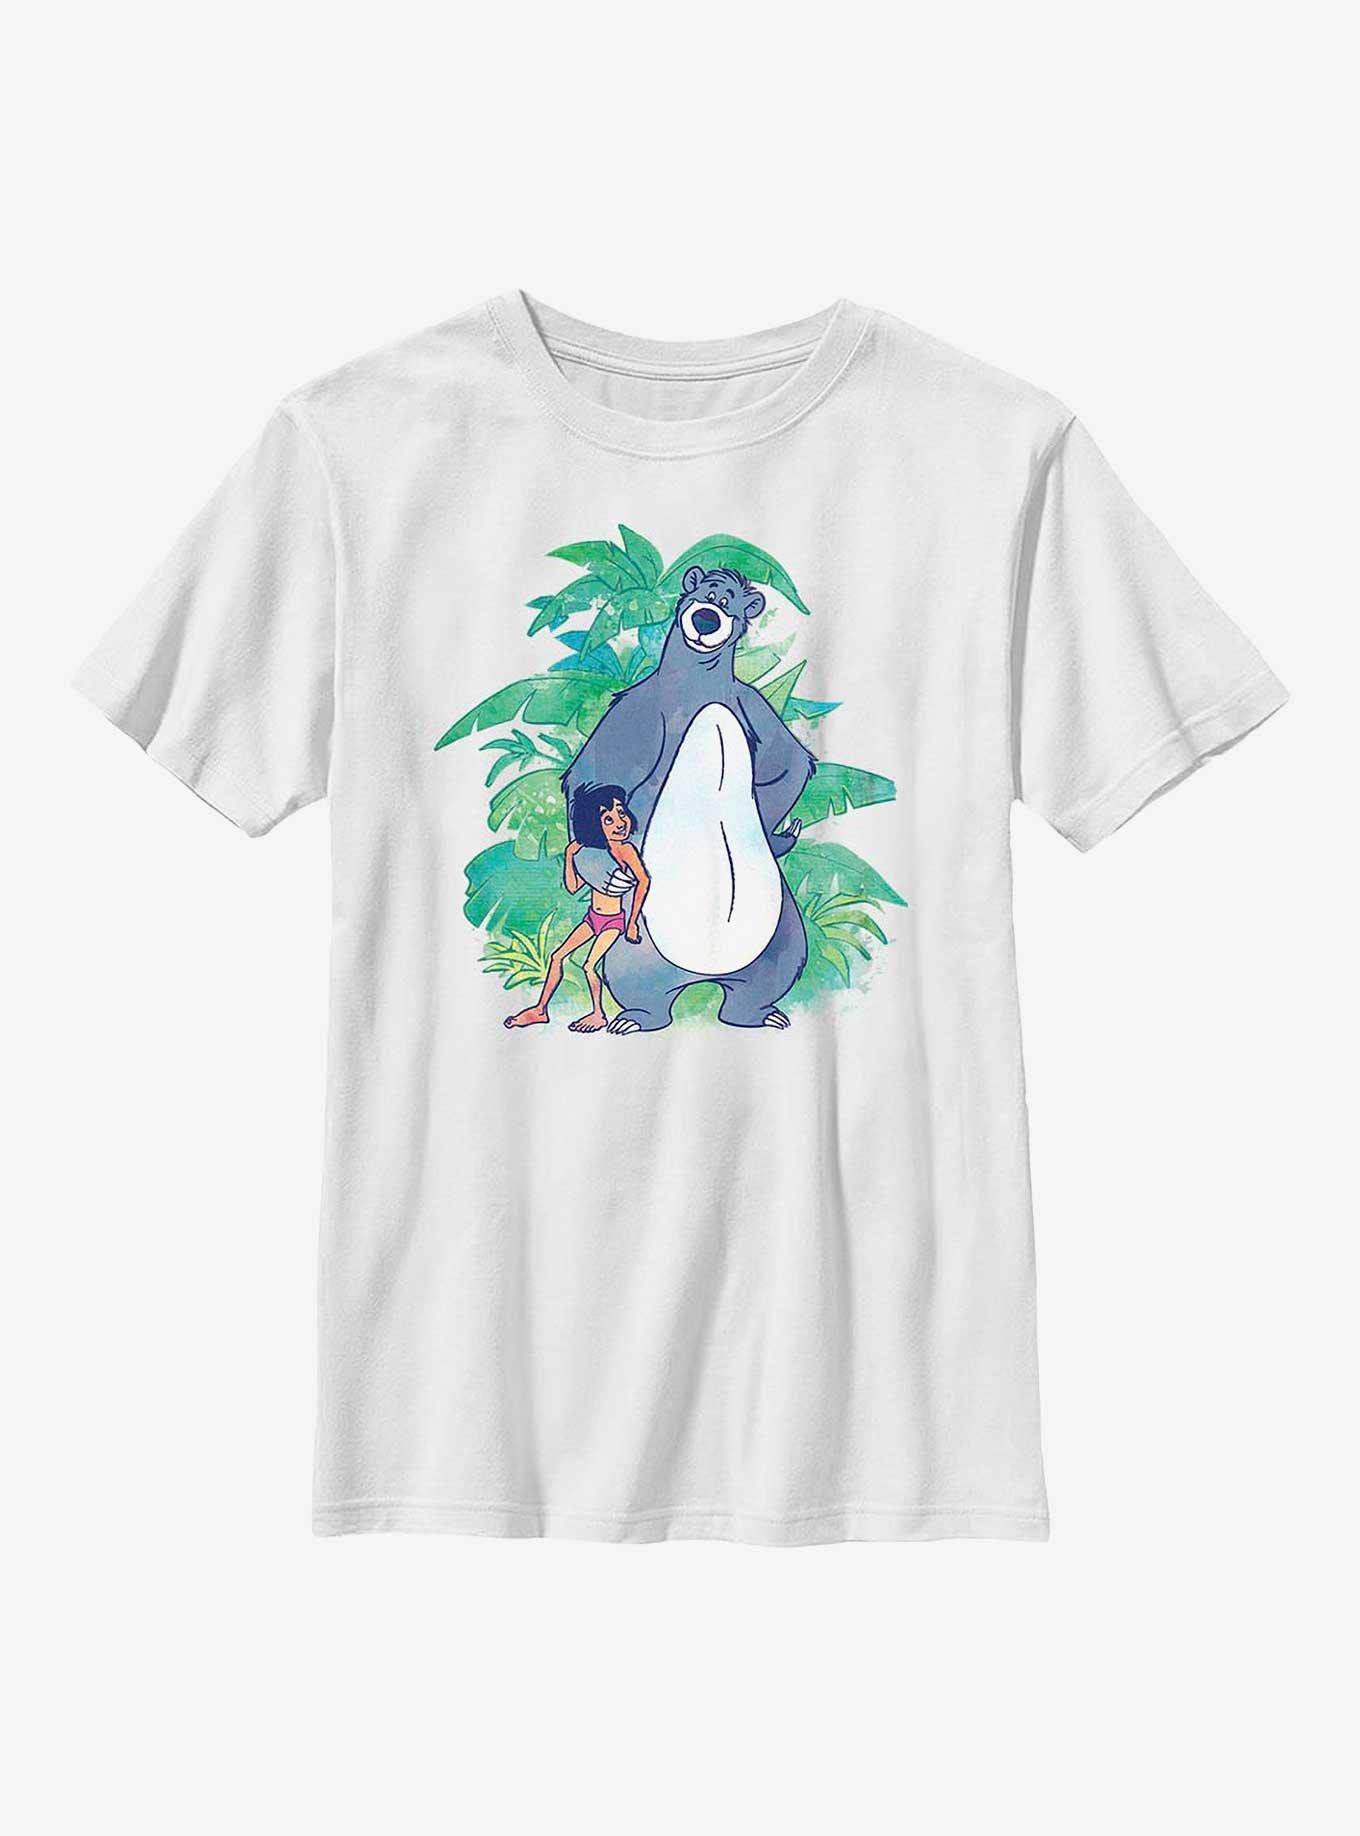 Disney The Jungle Book Jungle Boogie Youth T-Shirt, WHITE, hi-res